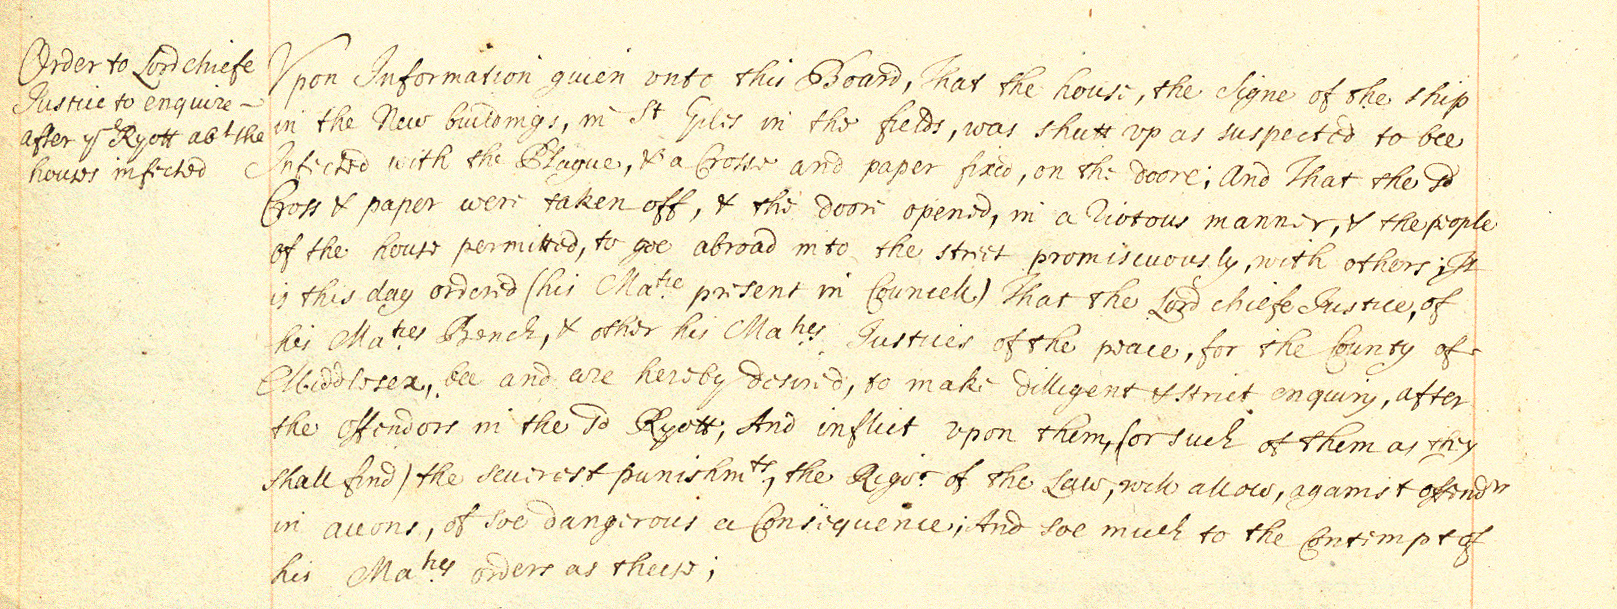 Case discussed at court at Whitehall in the presence of Charles II, 28 April 1665 (PC 2/58)